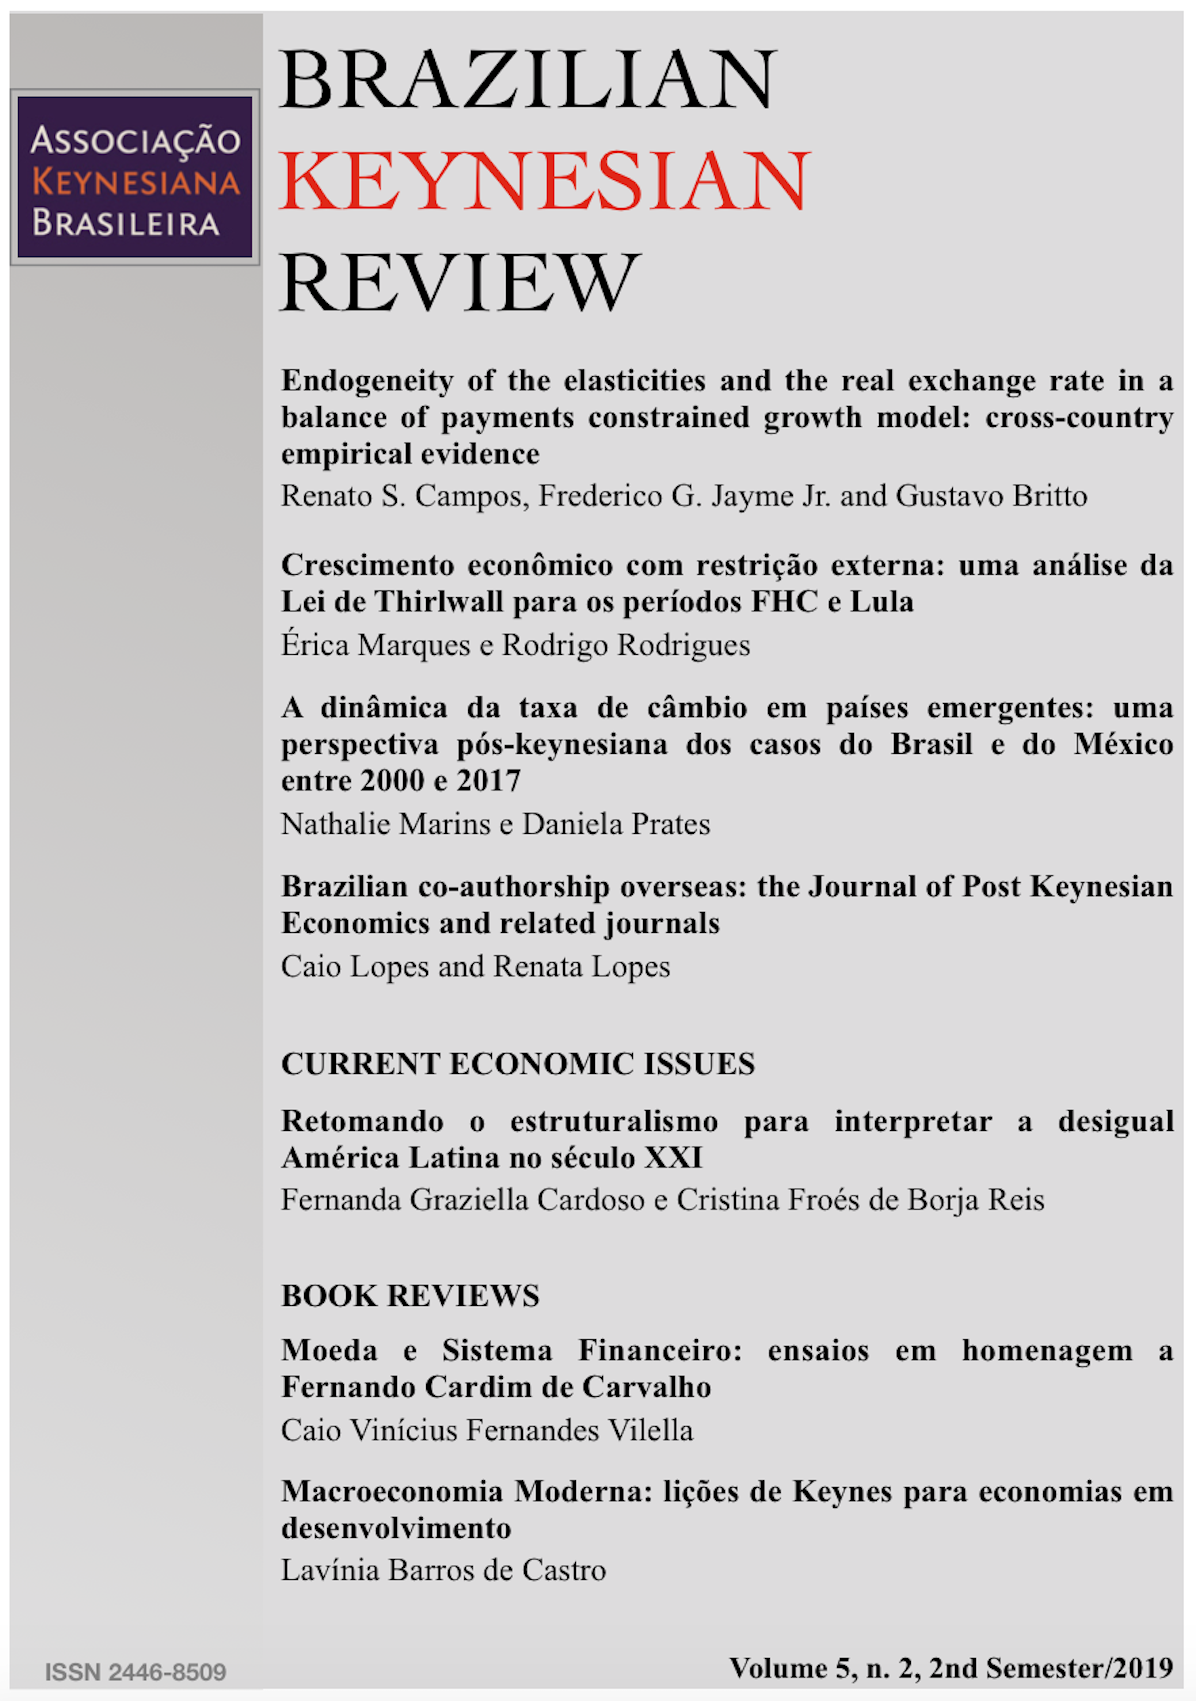 Front page of Brazilian Keynesian Review volume 5 number 2